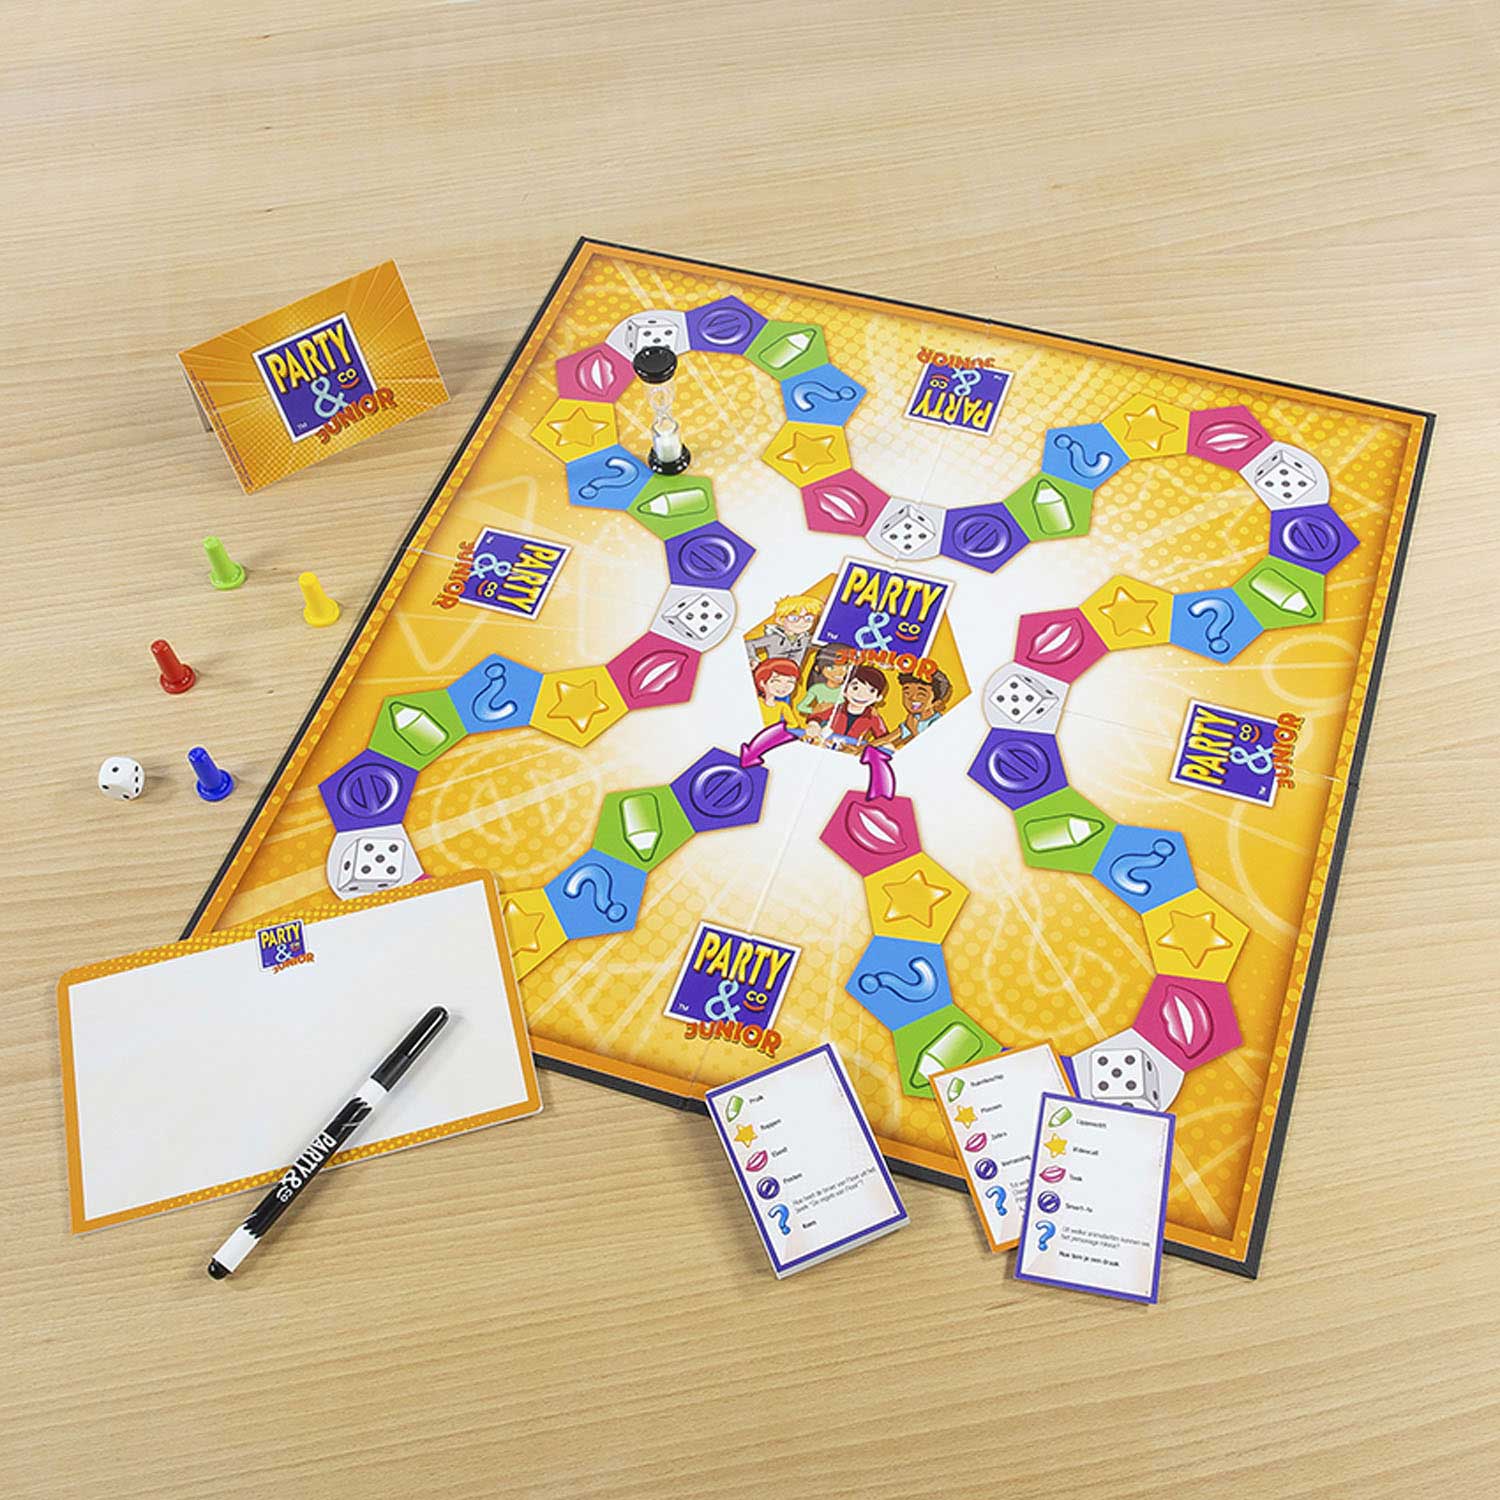 Iets Giet cijfer Jumbo Party & Co Junior Board Game | Thimble Toys